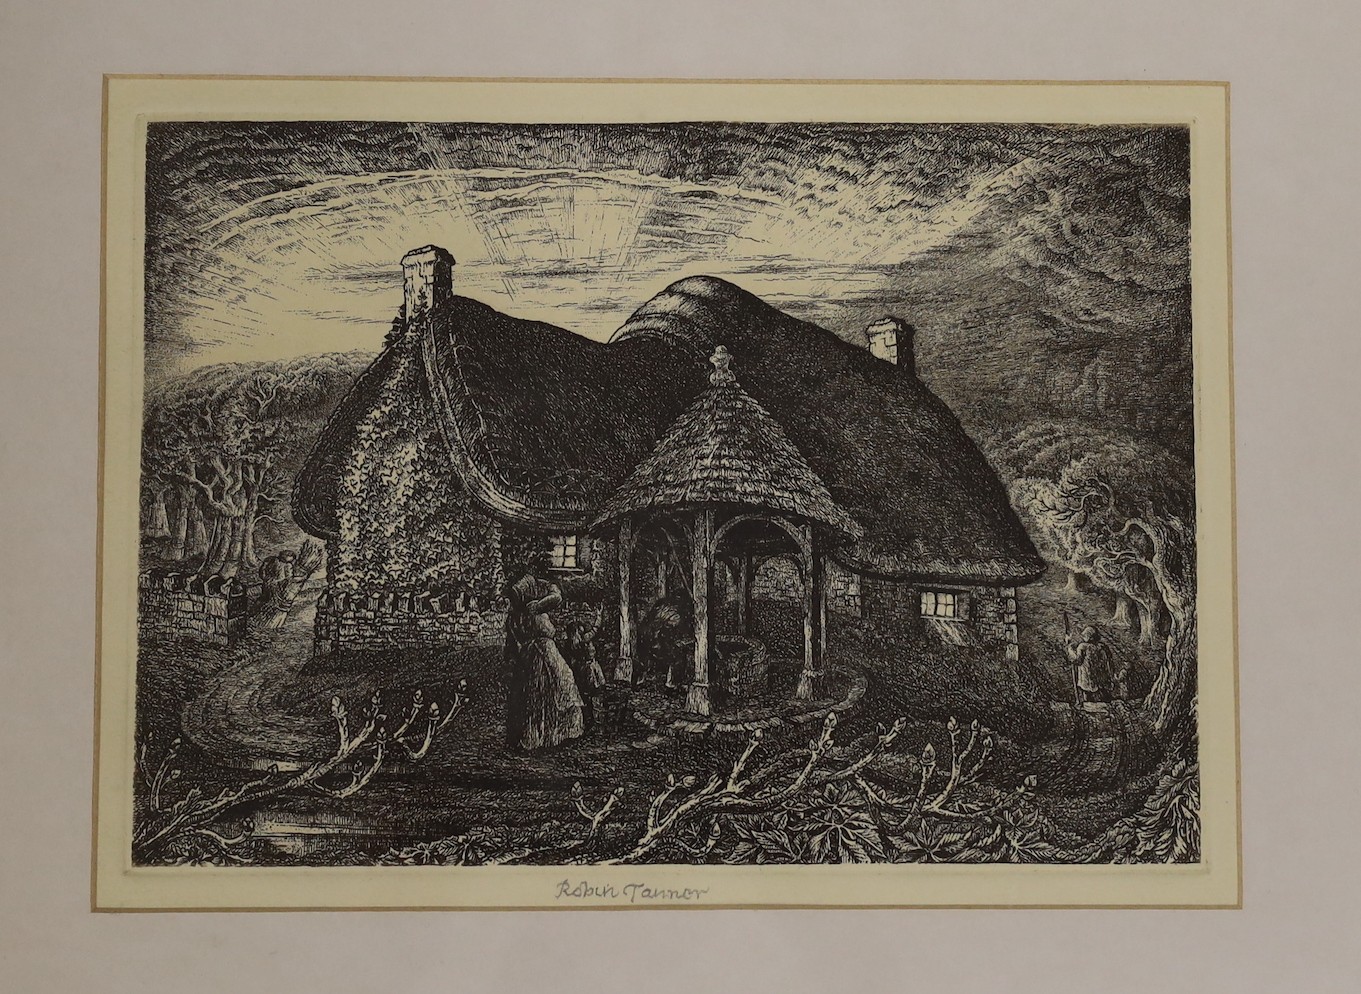 Robin Tanner (1904-1988), two etchings, woodland scene and cottage, 23 x 25cm, both signed in pencil